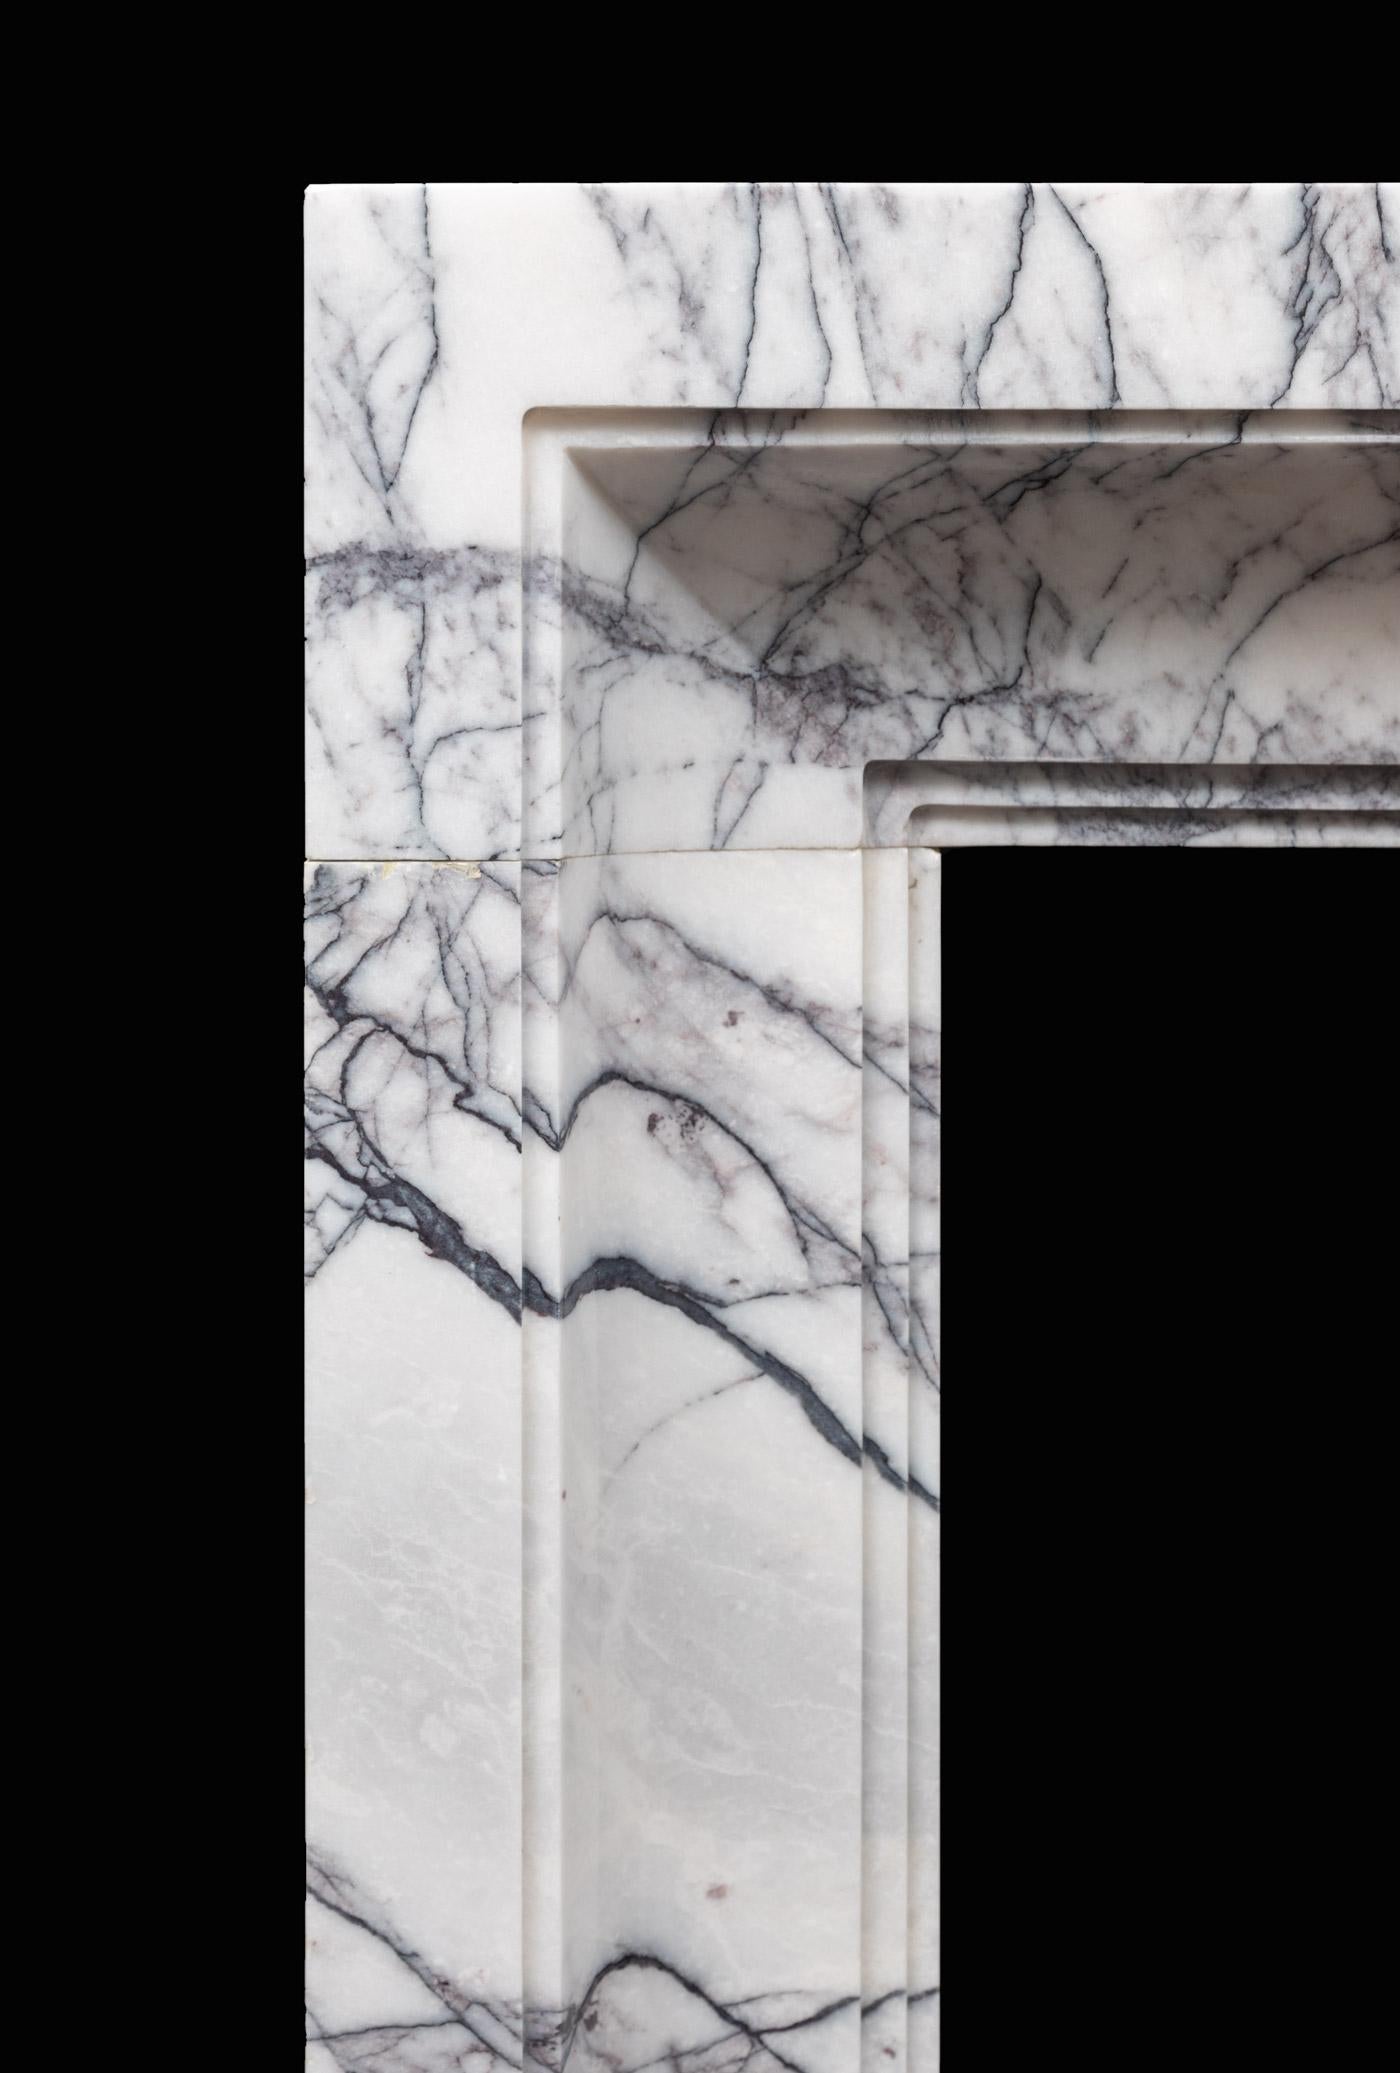 An Art Deco inspired fireplace surround made in strongly veined lilac marble. Produced in three solid blocks of carefully selected lilac marble, with vibrant markings that flow in the direction of the fireplace opening.